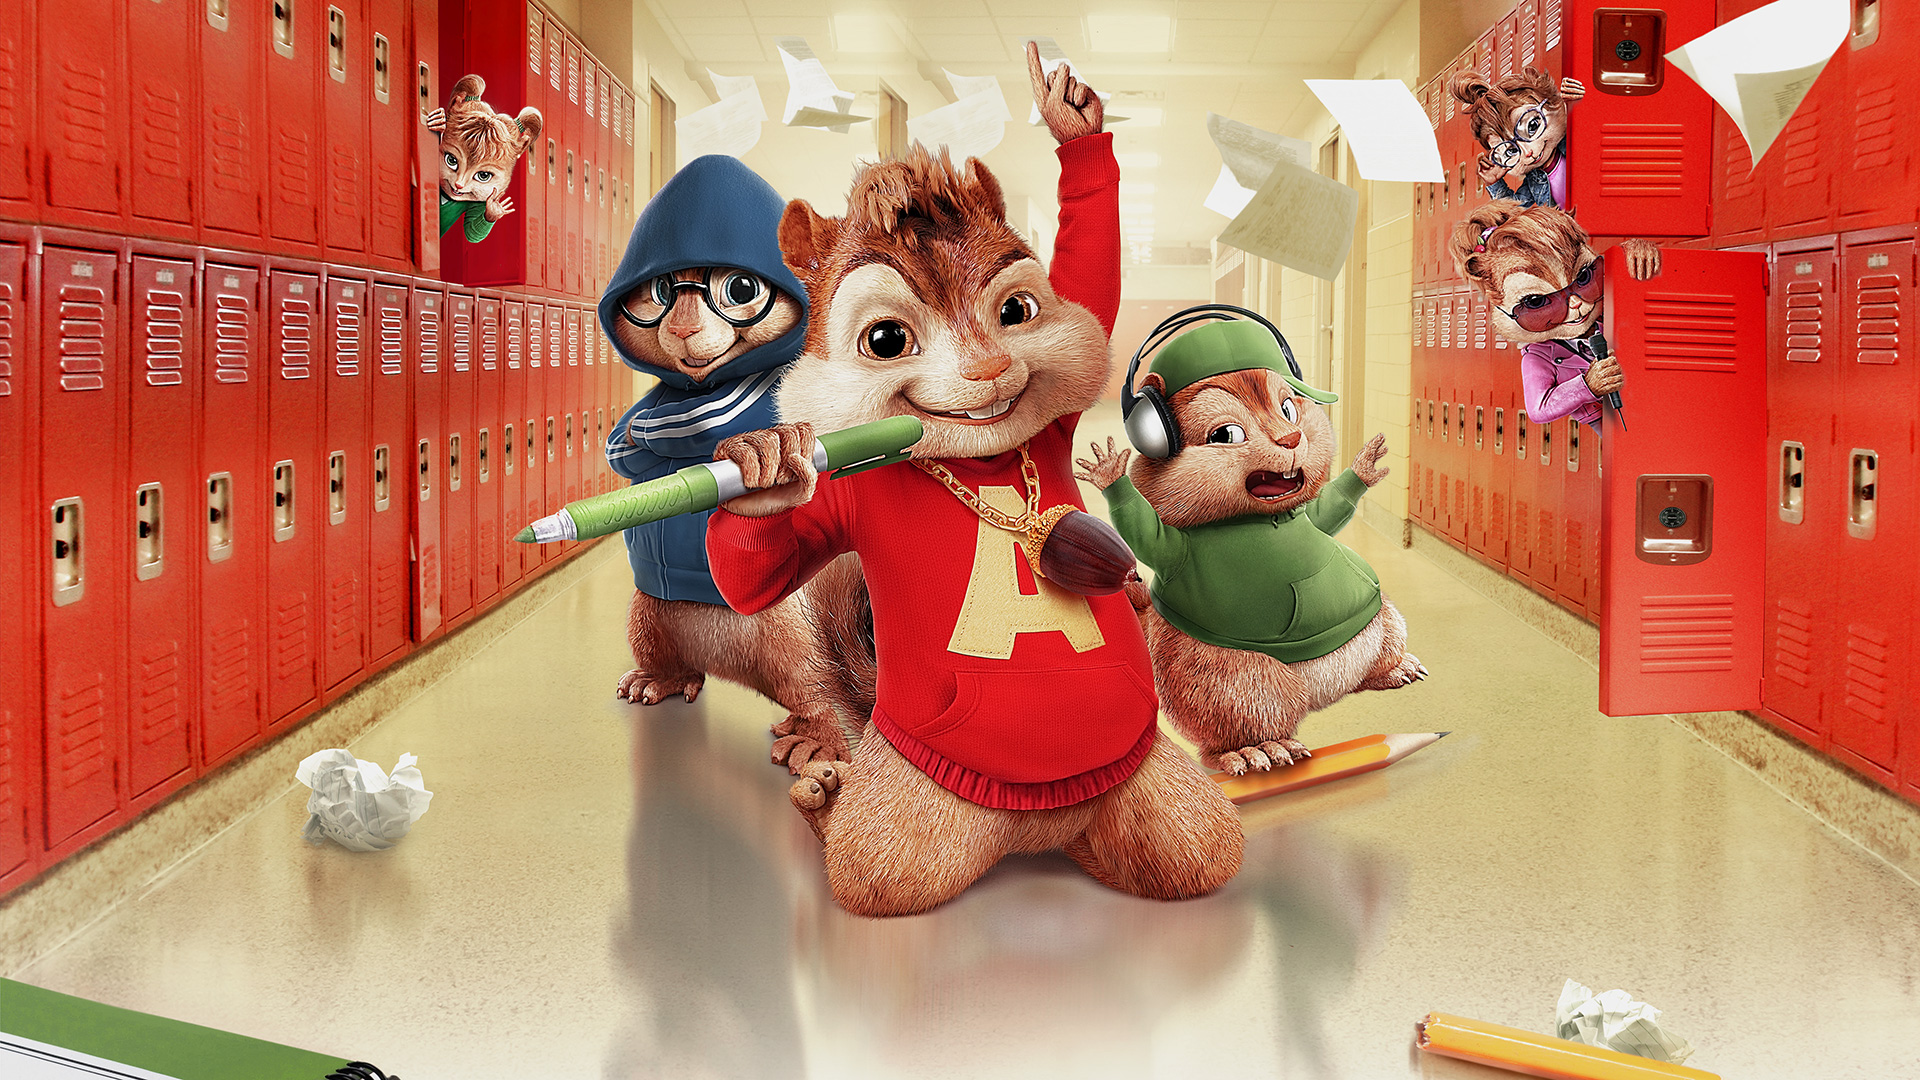 Movie Alvin and the Chipmunks: The Squeakquel HD Wallpaper | Background Image